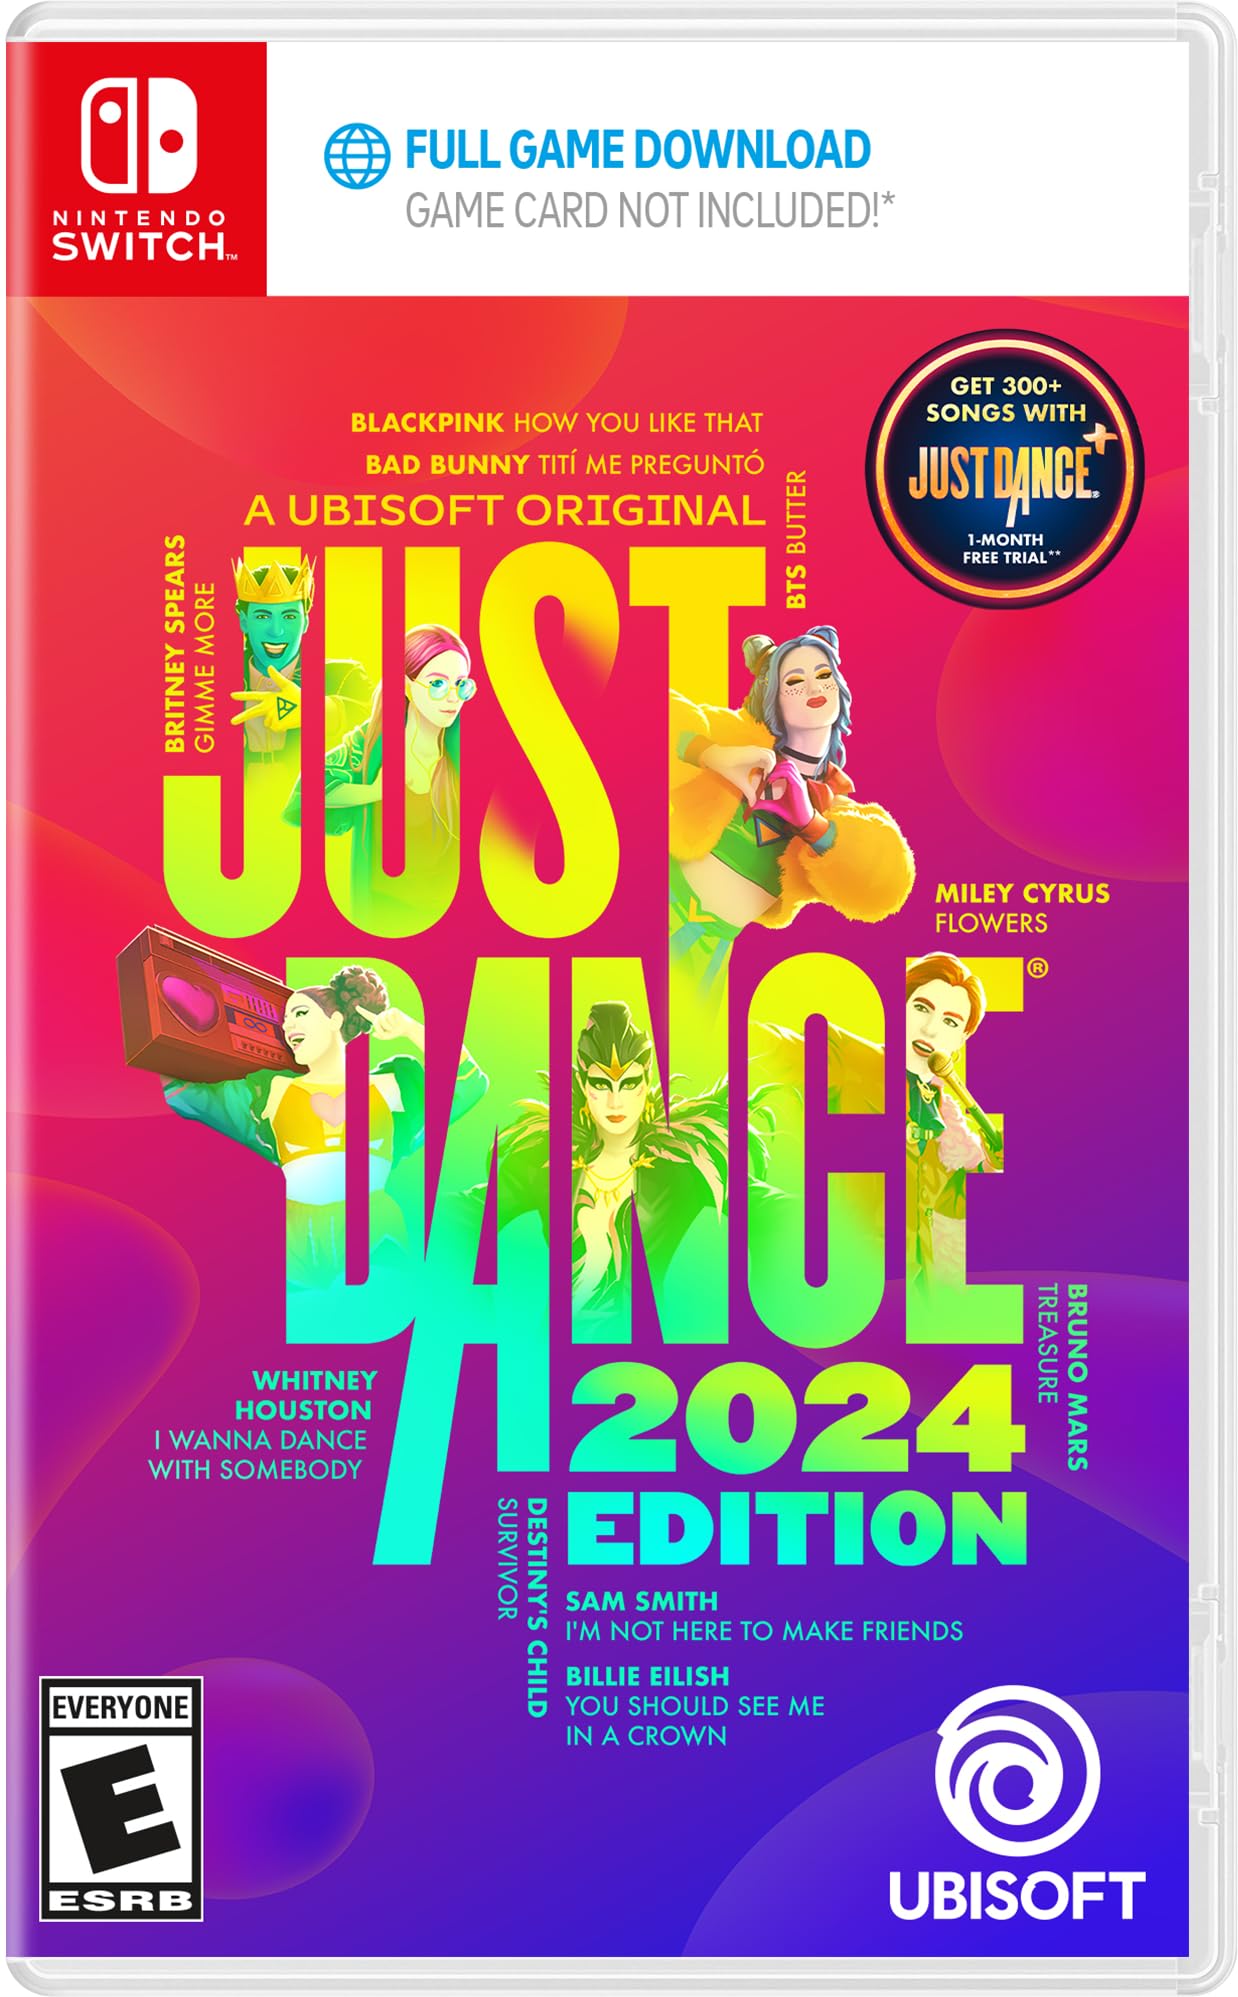 $29.99: Just Dance 2024 Edition - Amazon Exclusive Bundle (Code in Box, PS5, NSW, XSX)